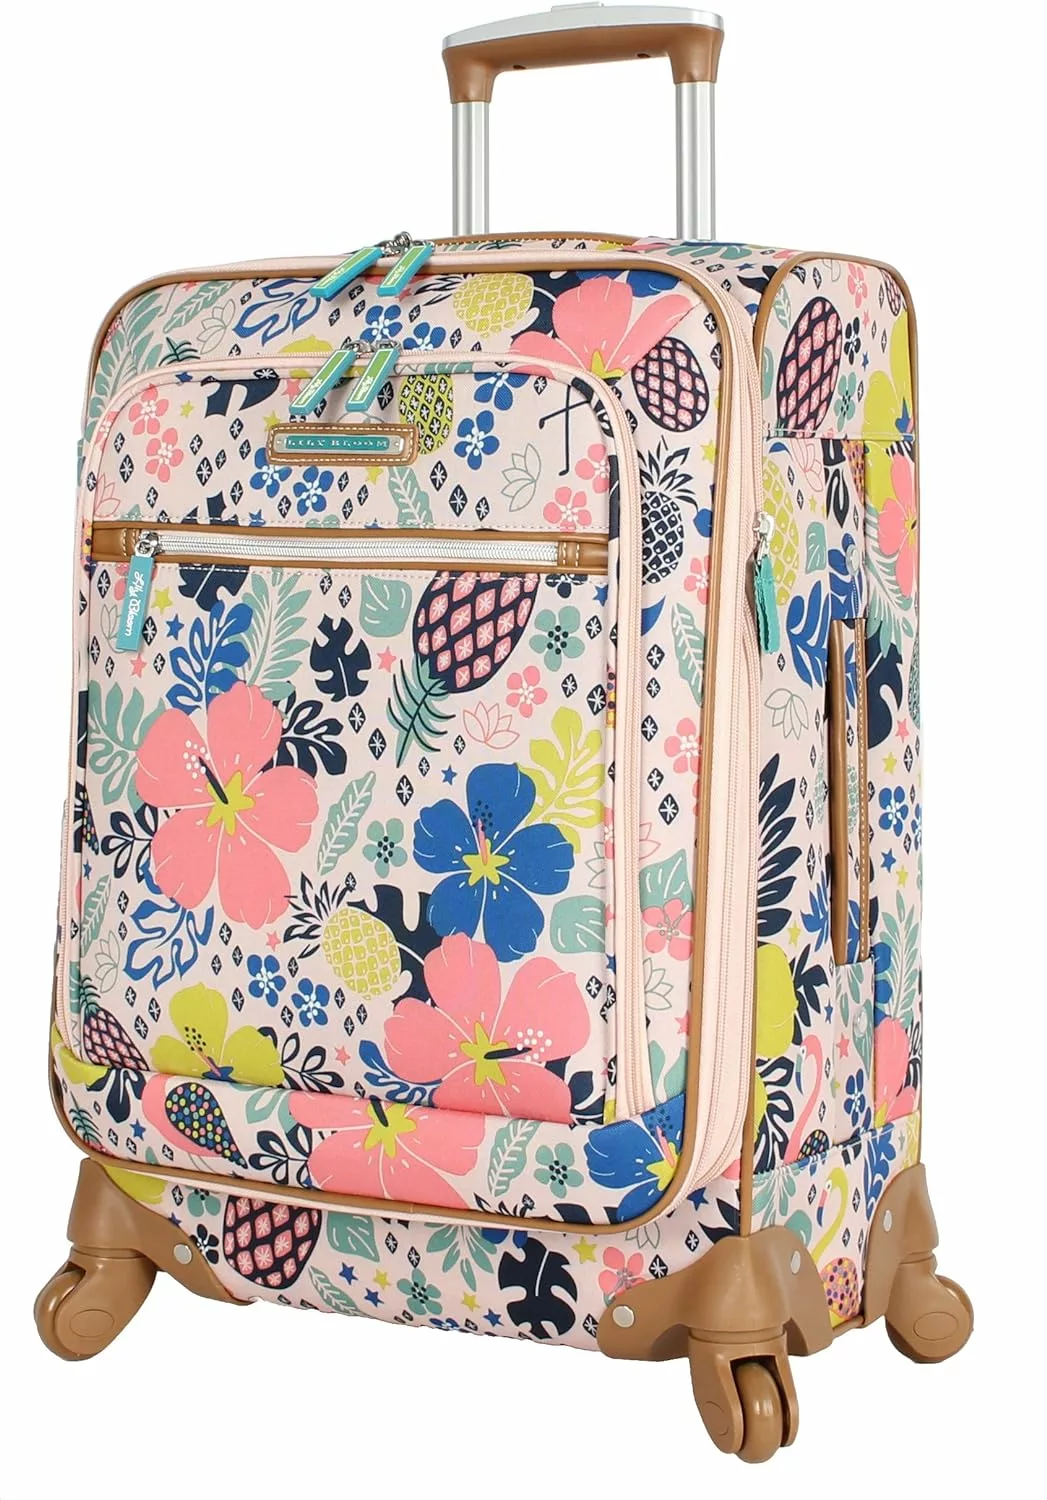 Lily Bloom Luggage Carry On Expandable Design Pattern Suitcase For Woman With Spinner Wheels, Trop Pineapple, 20 inches